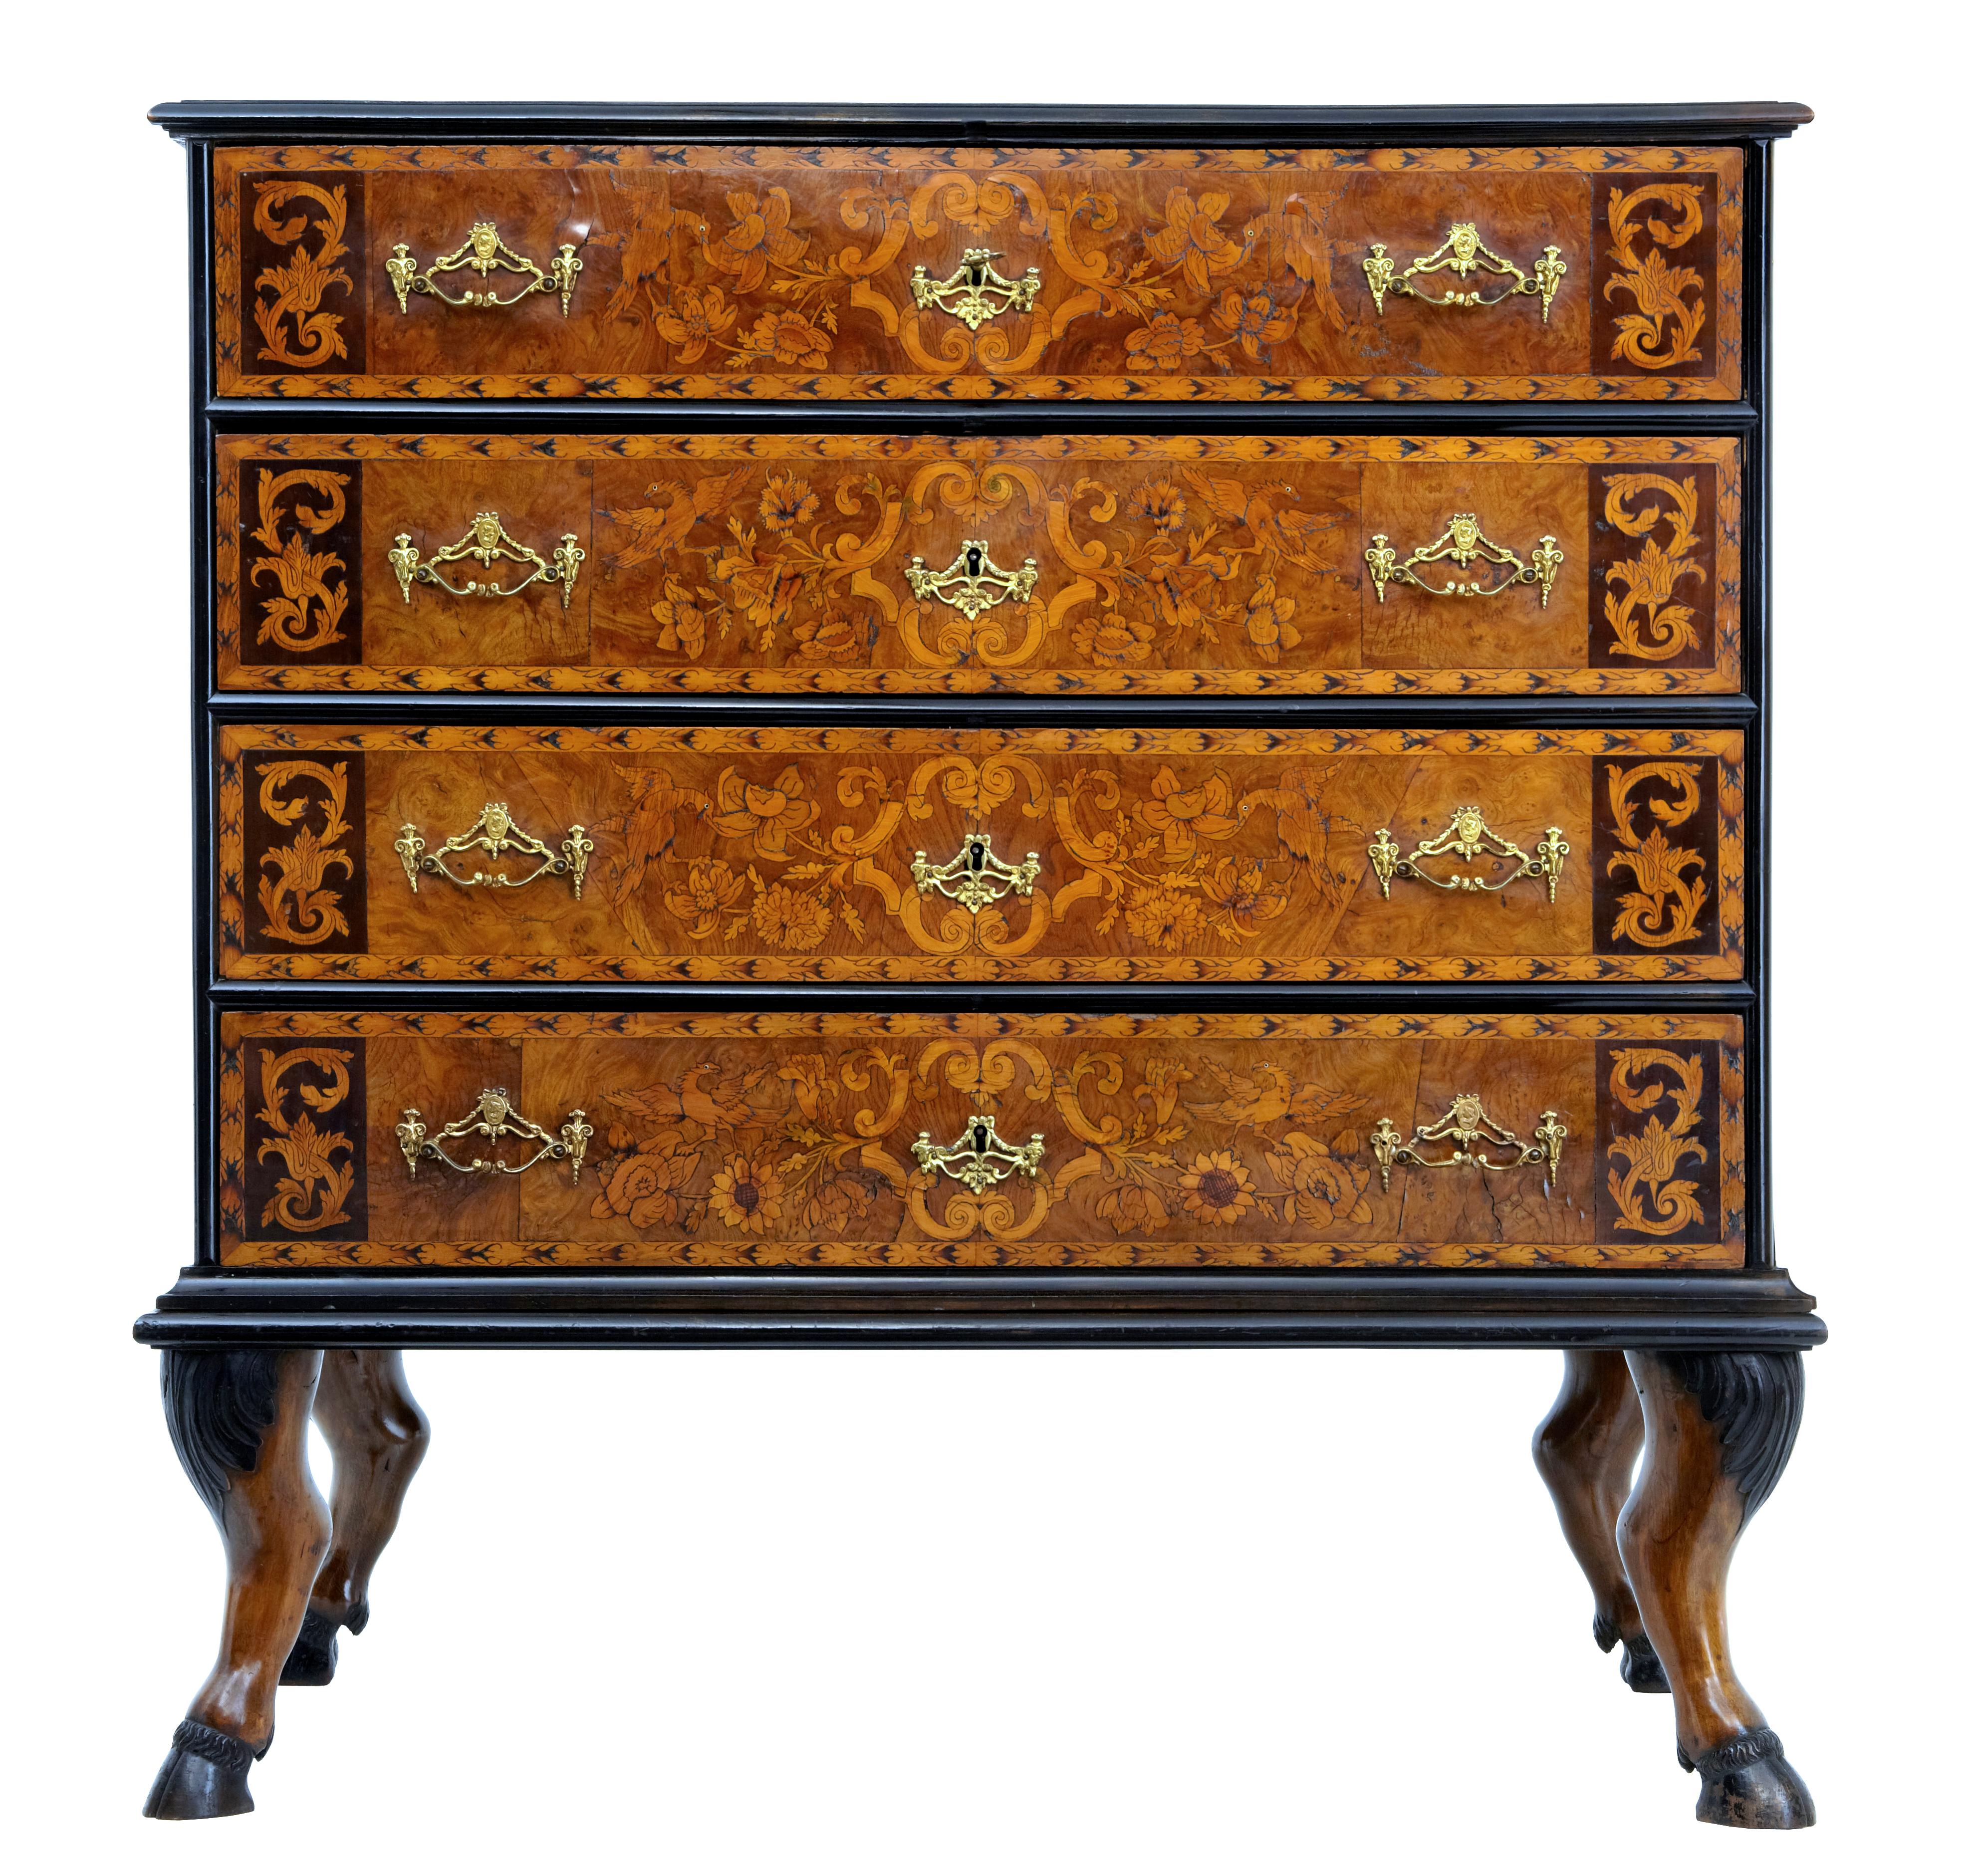 18th century and later continental marquetry chest on stand circa 1740.

Stunning 18th century chest circa 1740 on a 19th century stand. 

Beautifully example of floral marquetry inlaid with walnut, ebony, boxwood and elm. Profusely inlaid